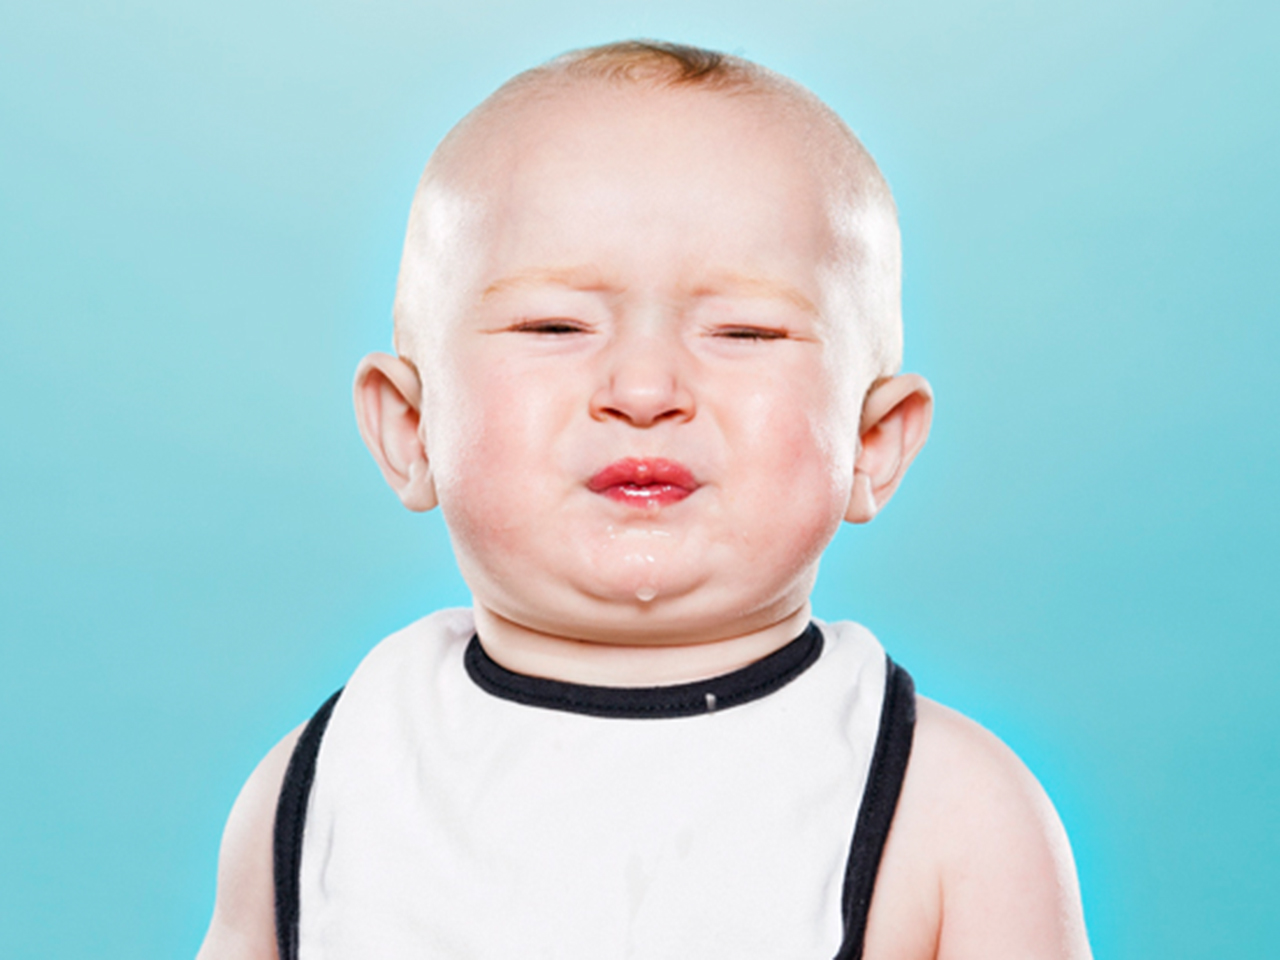 Pucker up: Kids tasting lemons for the first time - TODAY.com